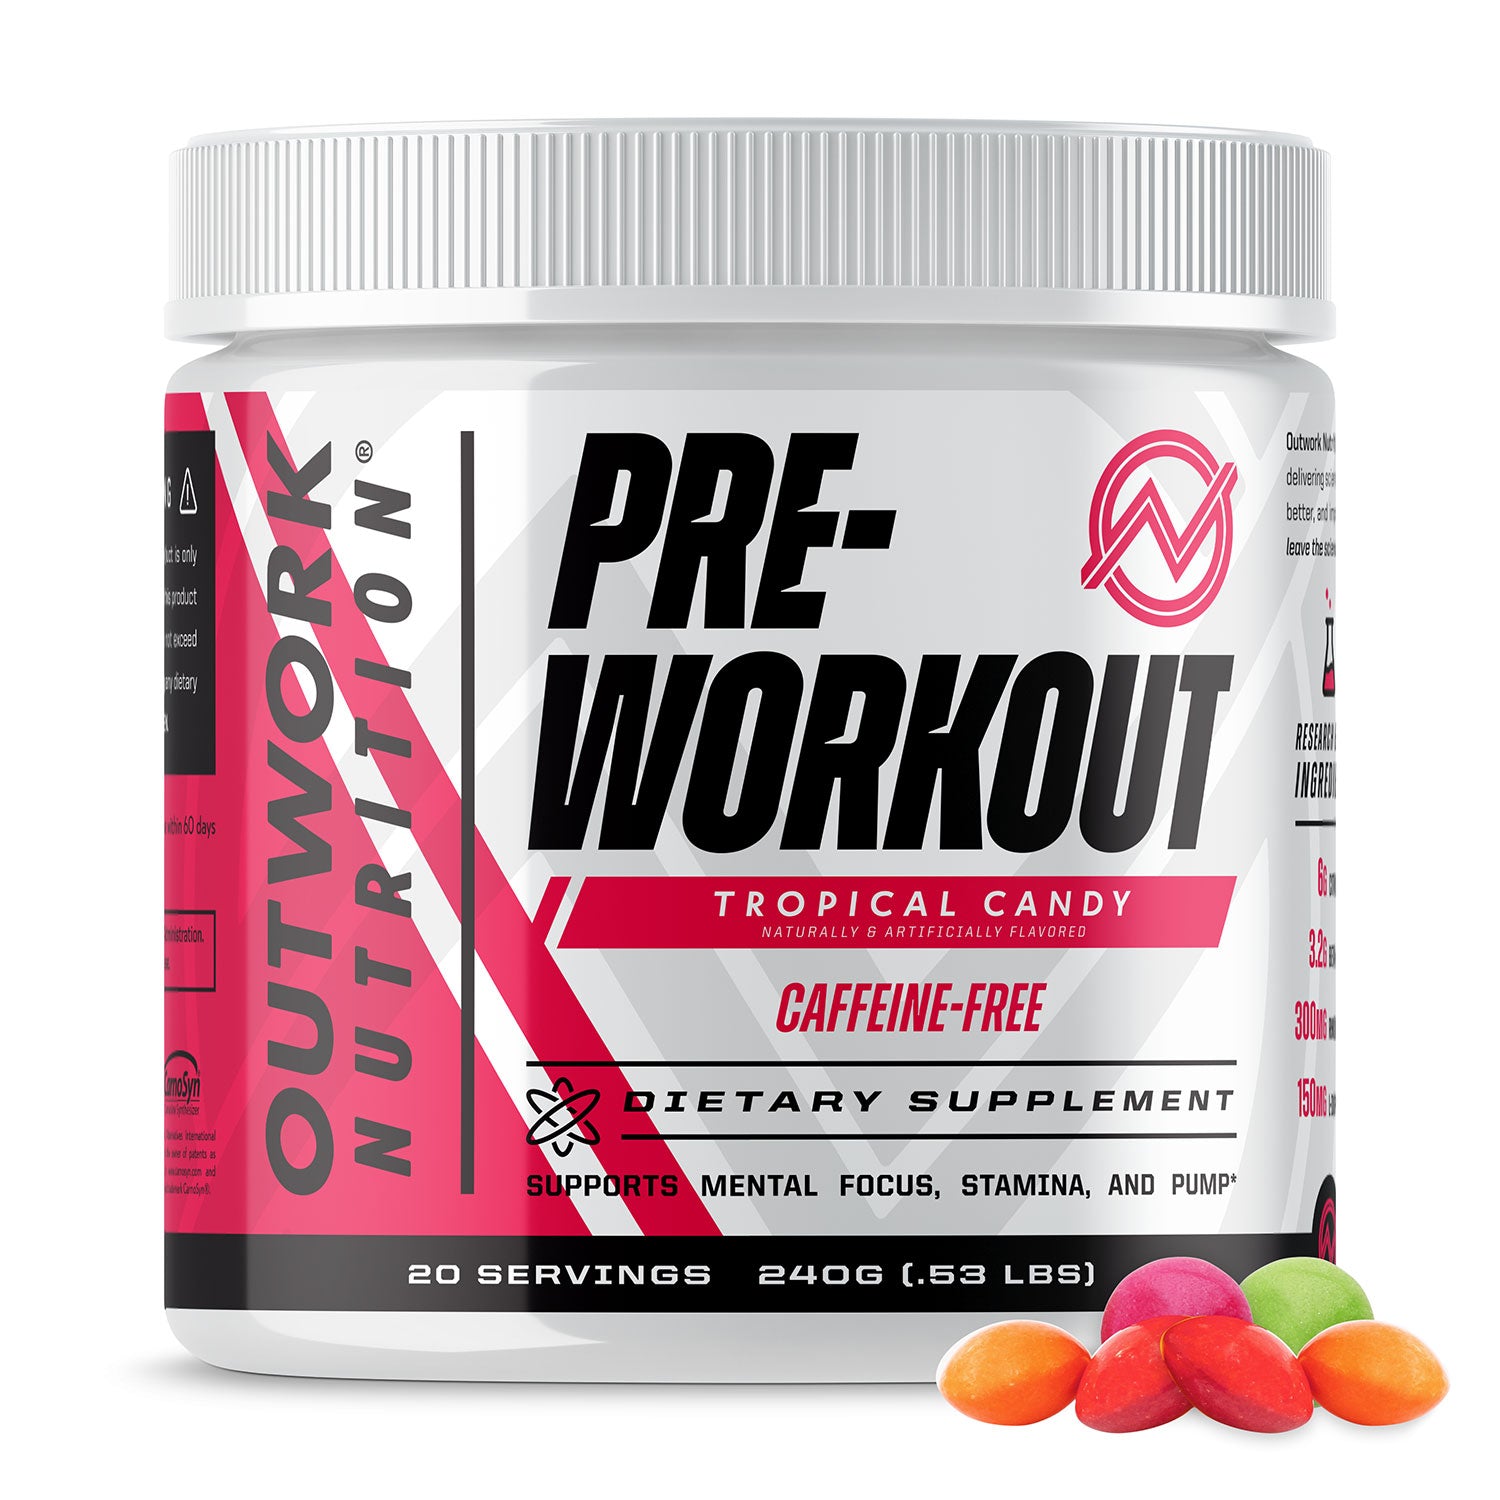 caffeine-free pre-workout tropical candy flavor